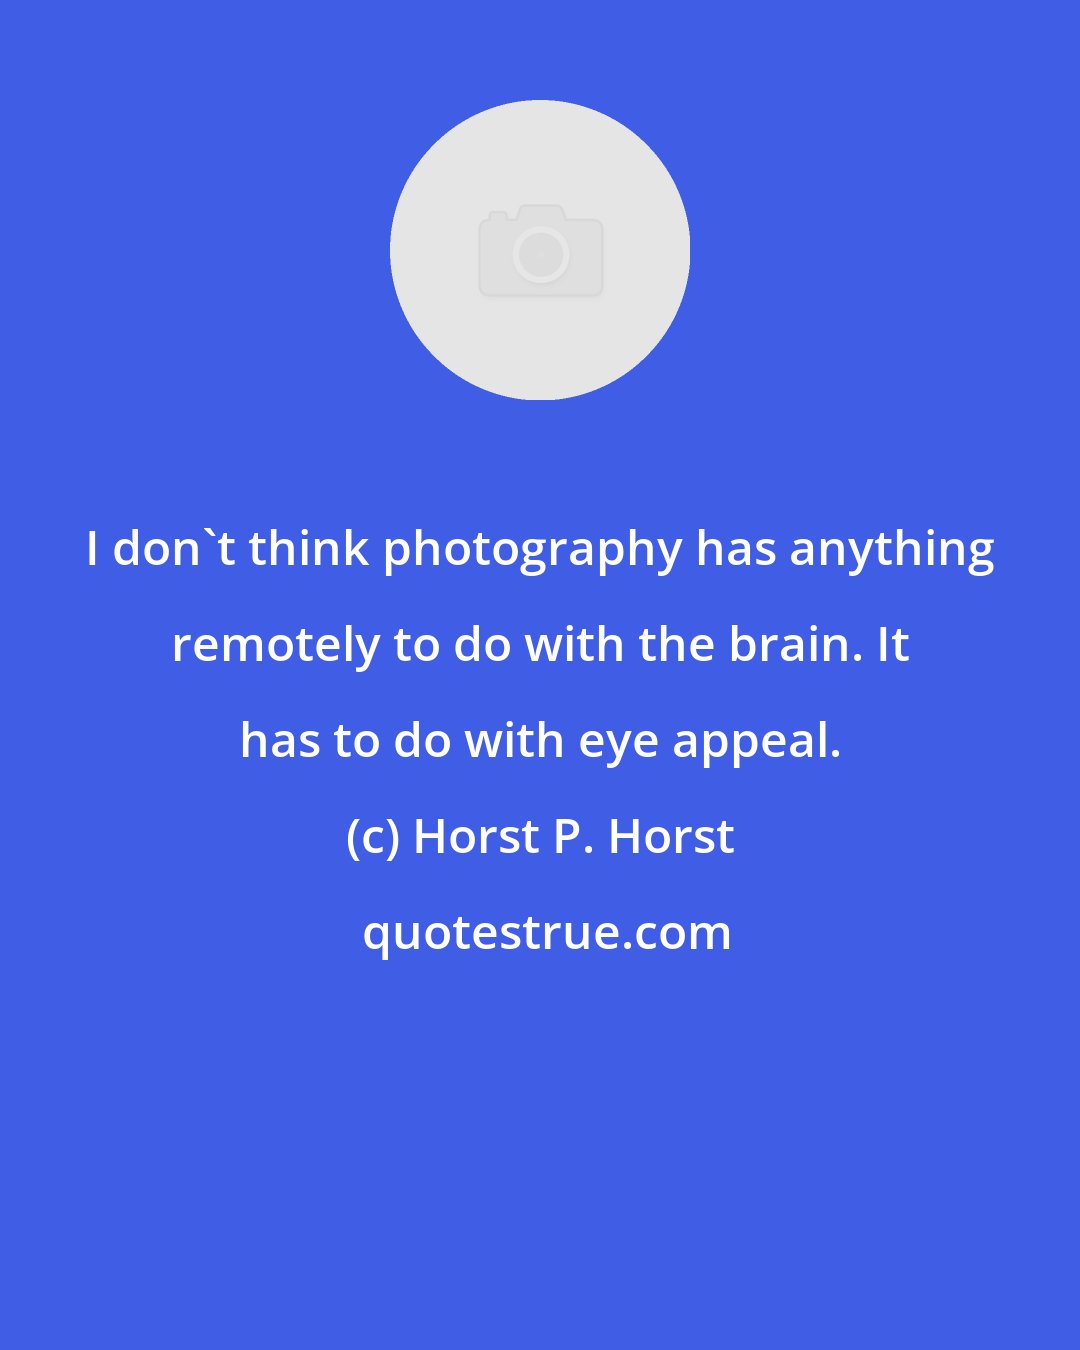 Horst P. Horst: I don't think photography has anything remotely to do with the brain. It has to do with eye appeal.